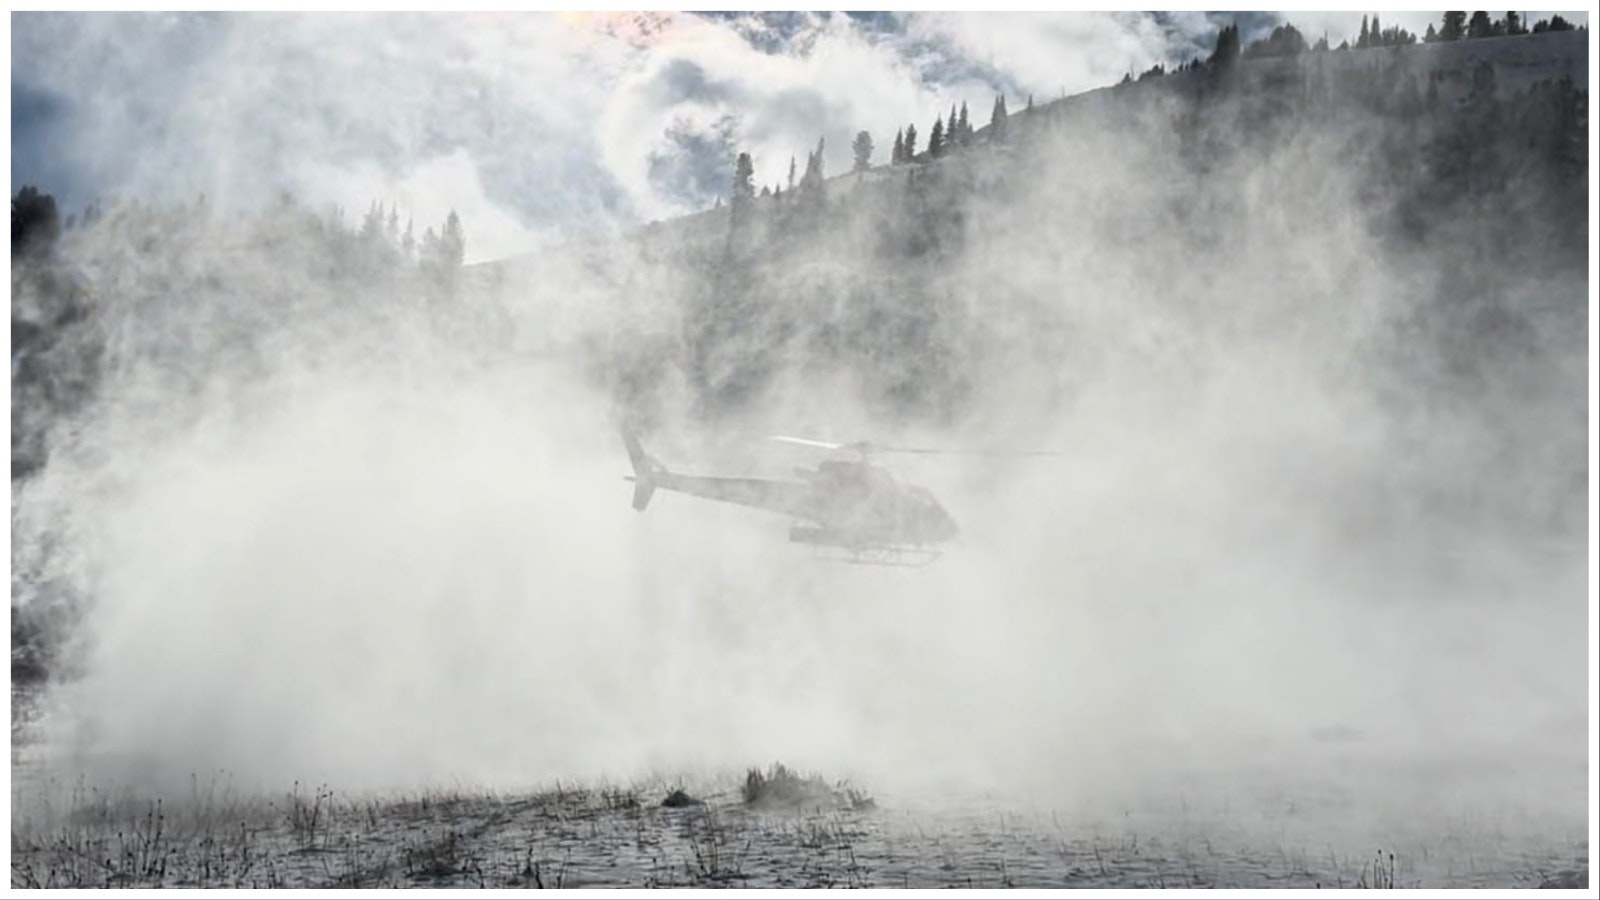 A search and rescue helicopter that helped search for Dan Mulholland kicks up loose snow.